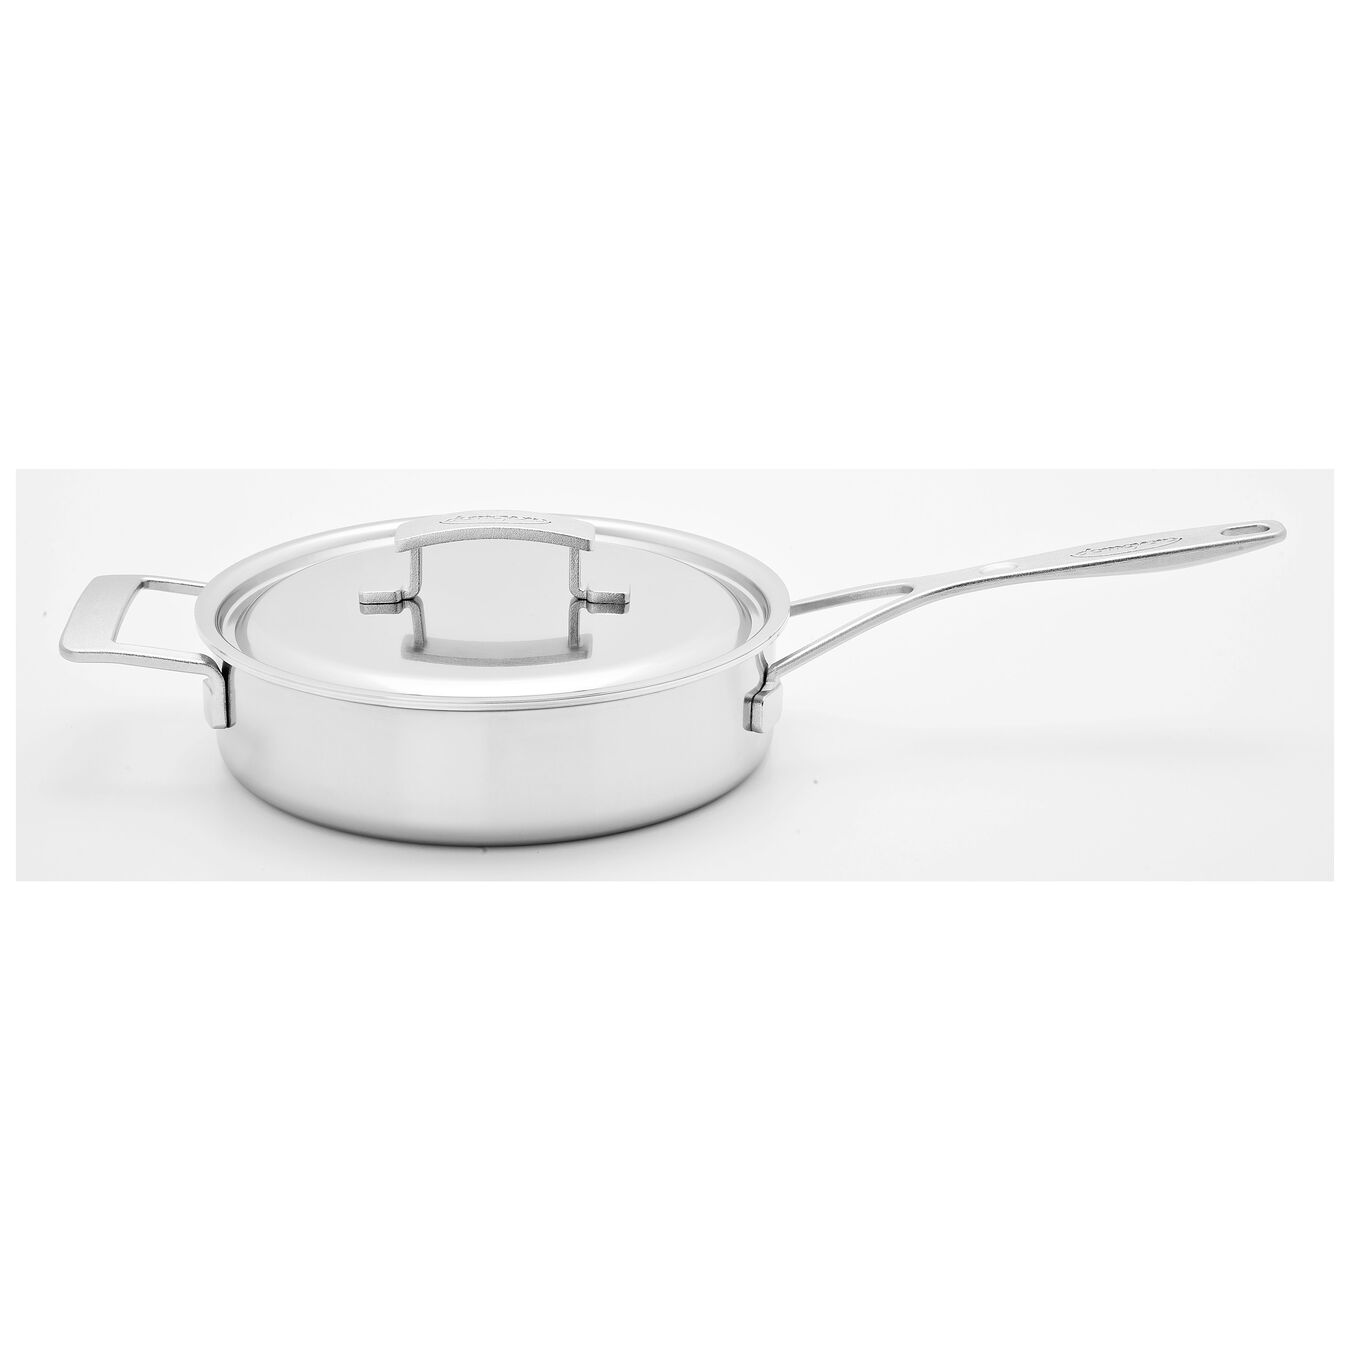 Demeyere Industry 5-Ply 3-qt Stainless Steel Saute Pan | Official Demeyere Industry 5 Ply 3 Qt Stainless Steel Saute Pan